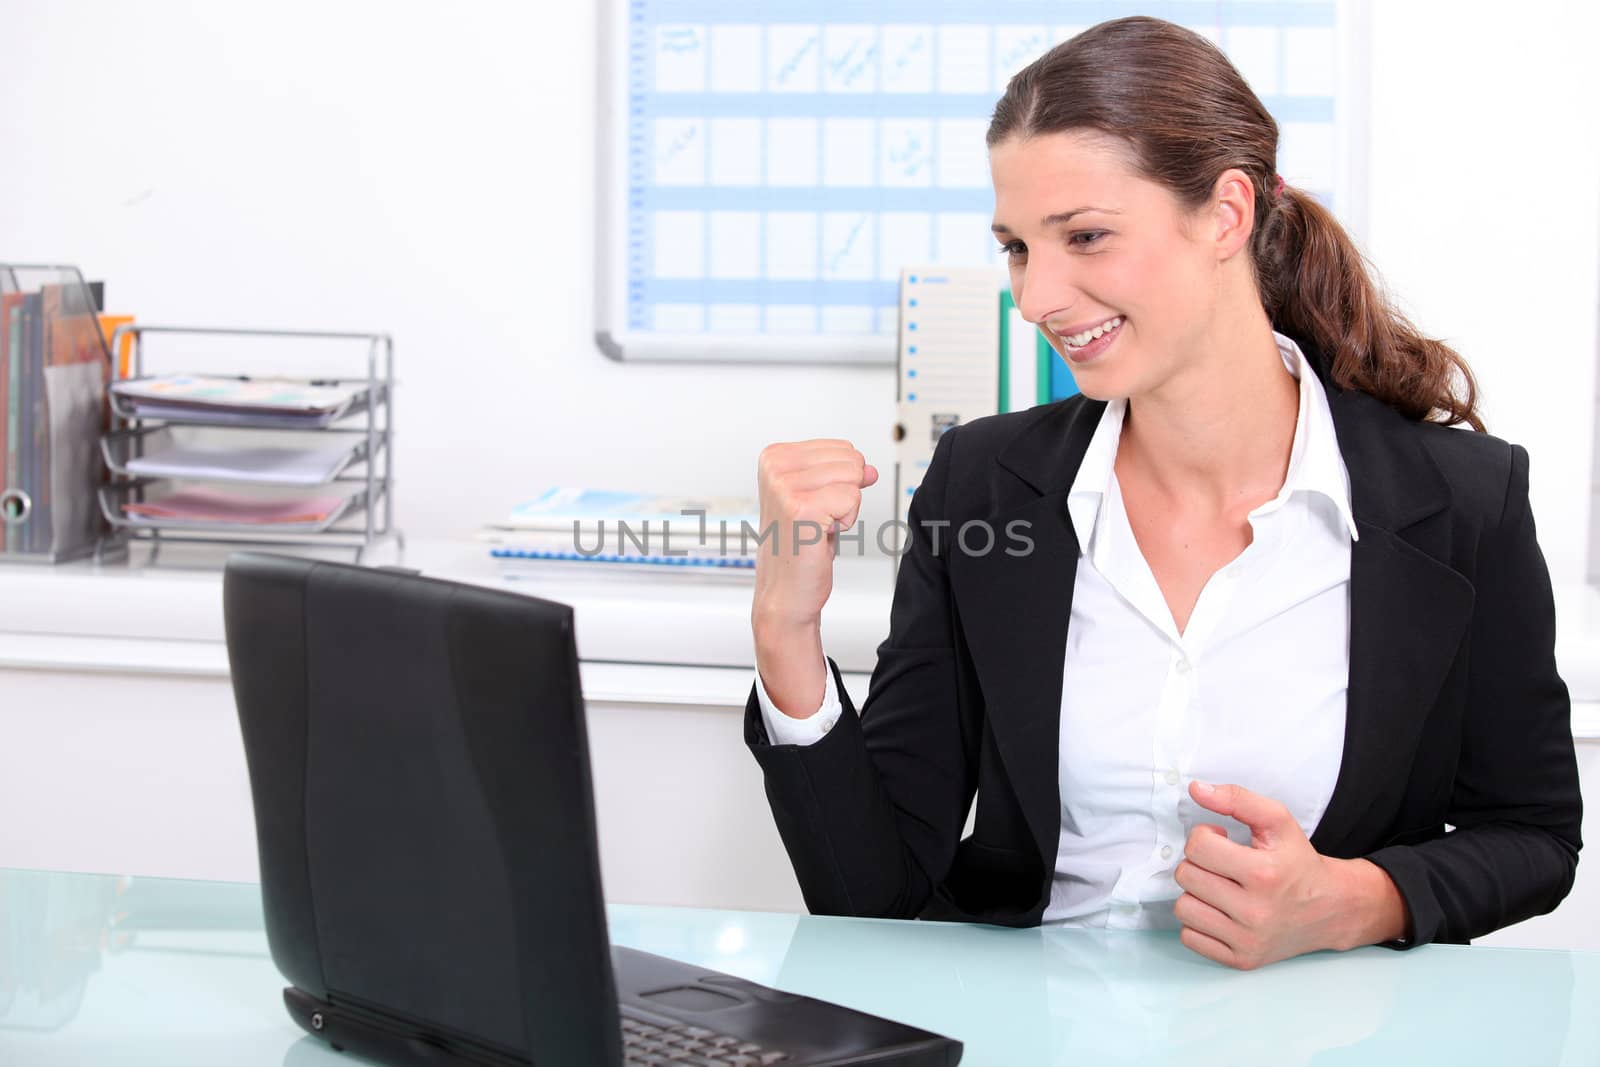 Smart woman punching the air in delight after looking at her laptop